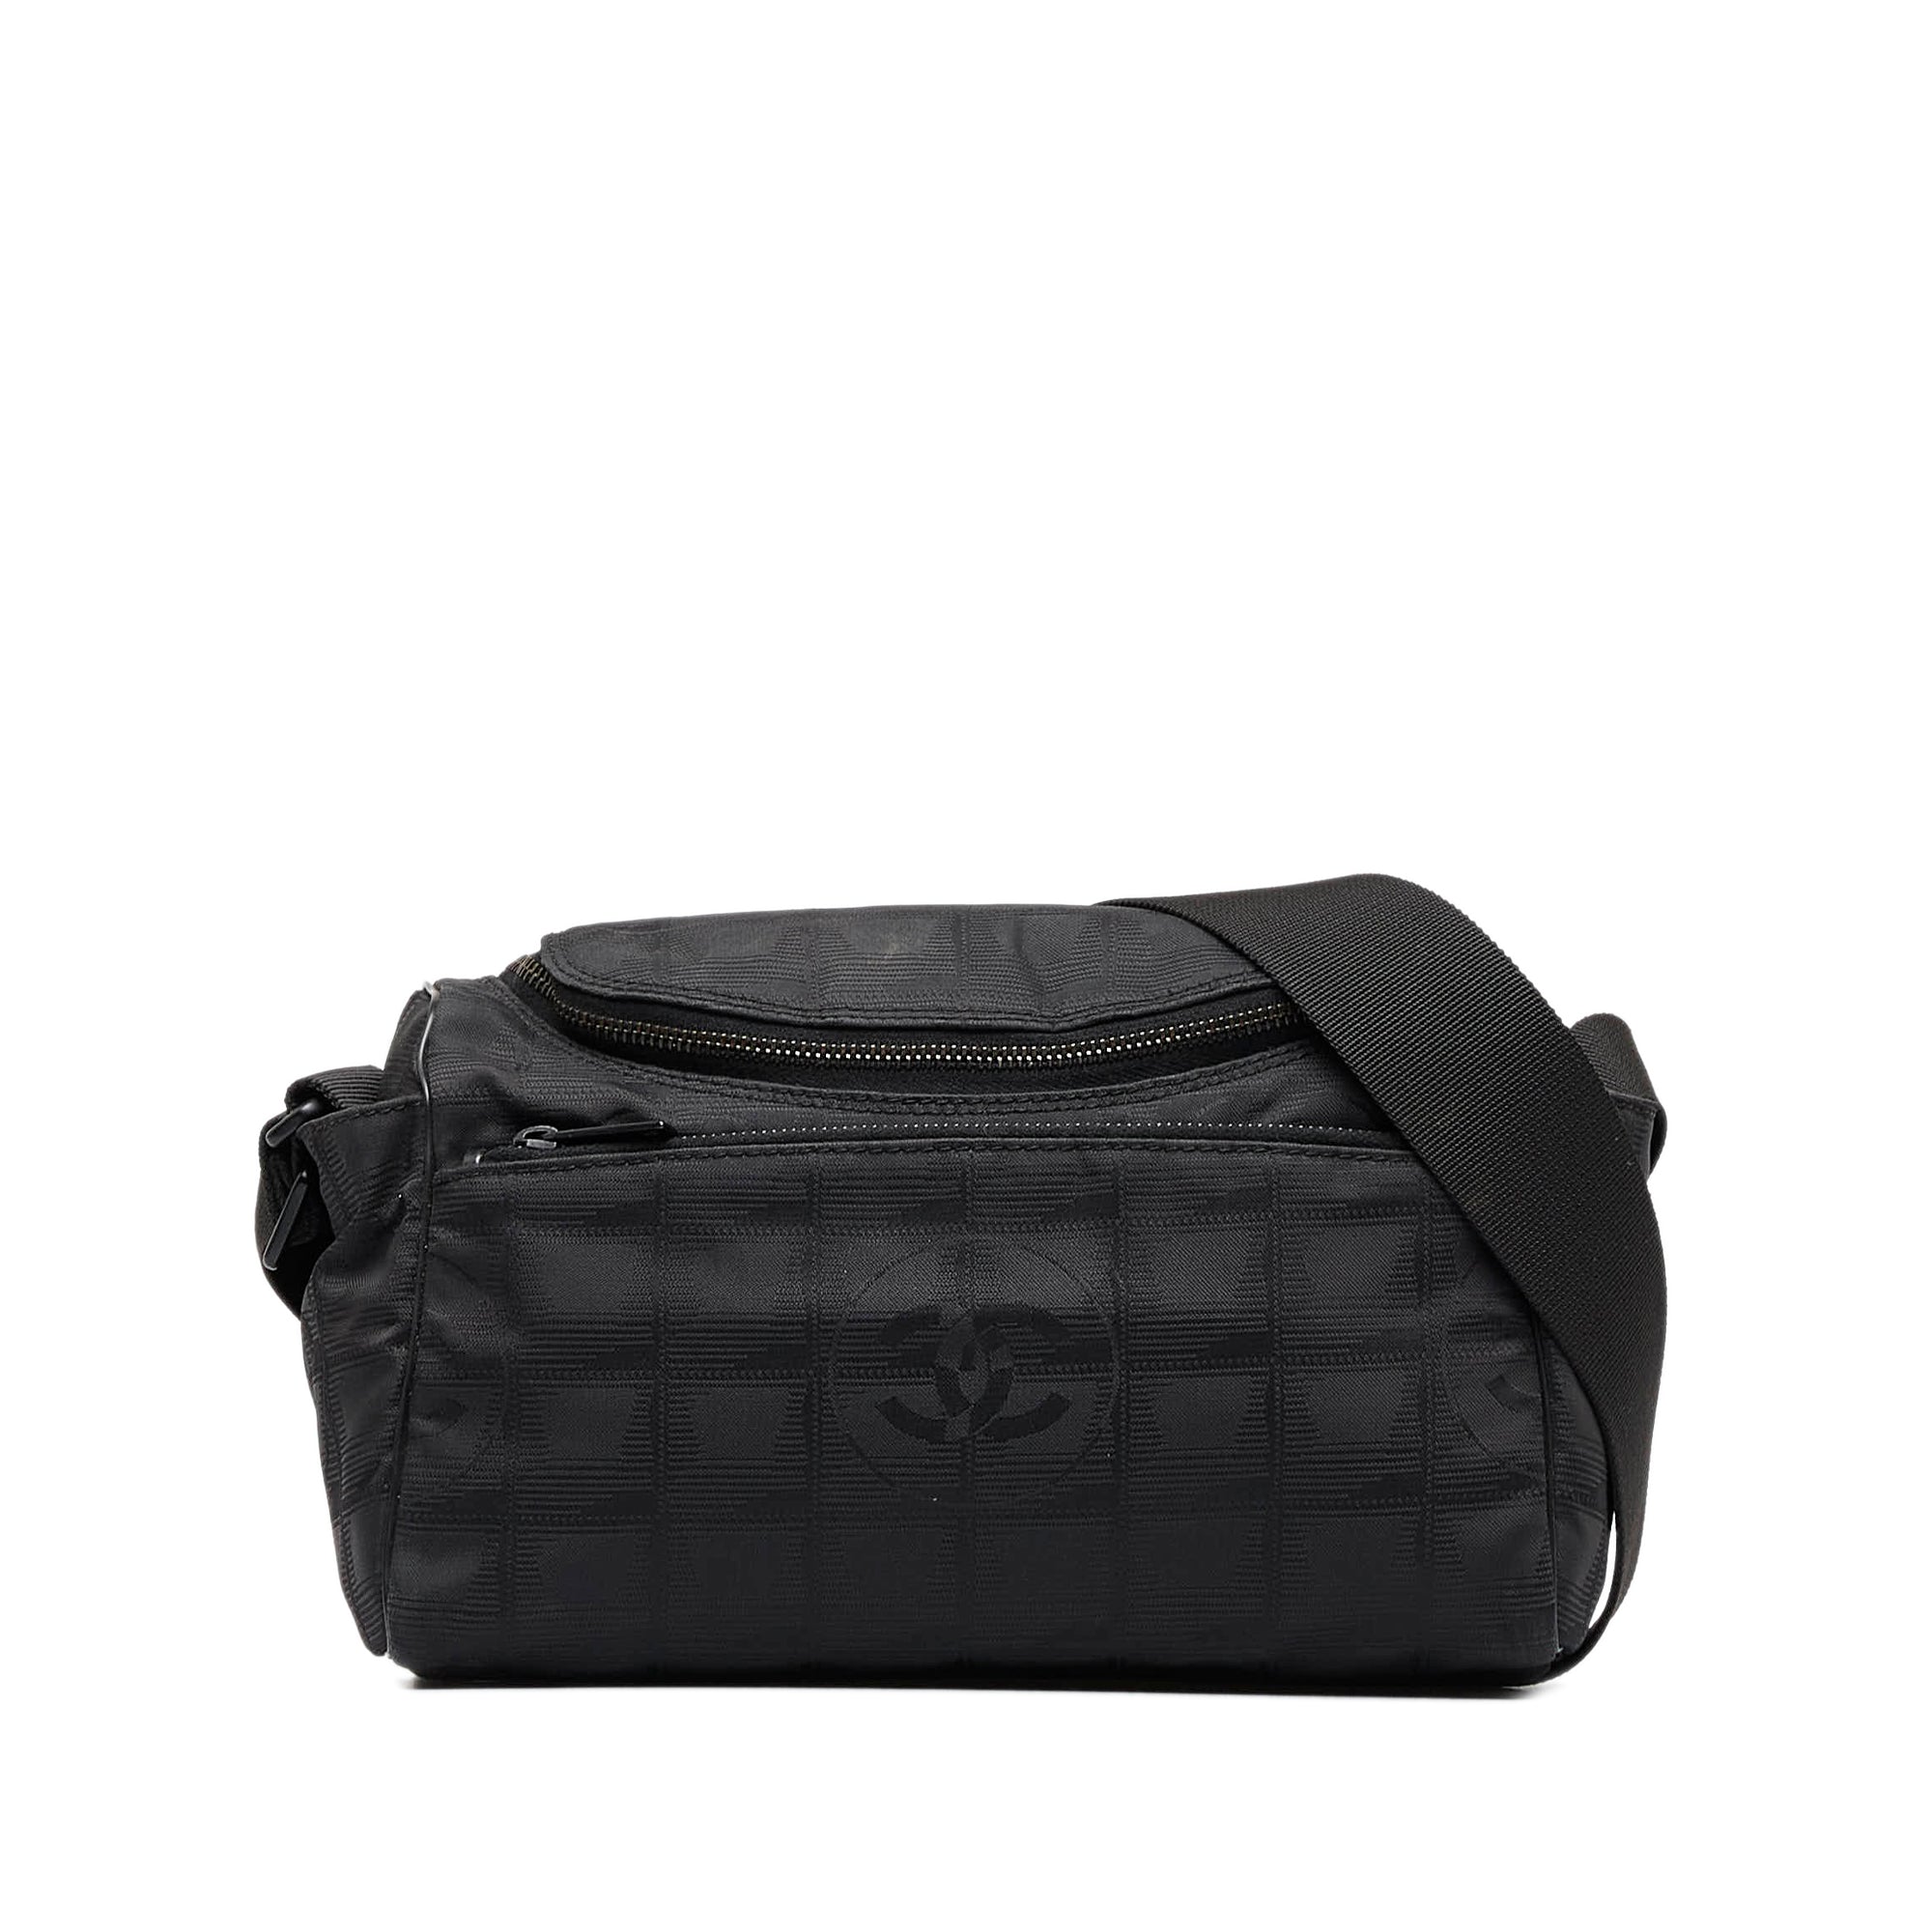 HealthdesignShops, Second Hand Chanel 2.55 carrying Bags